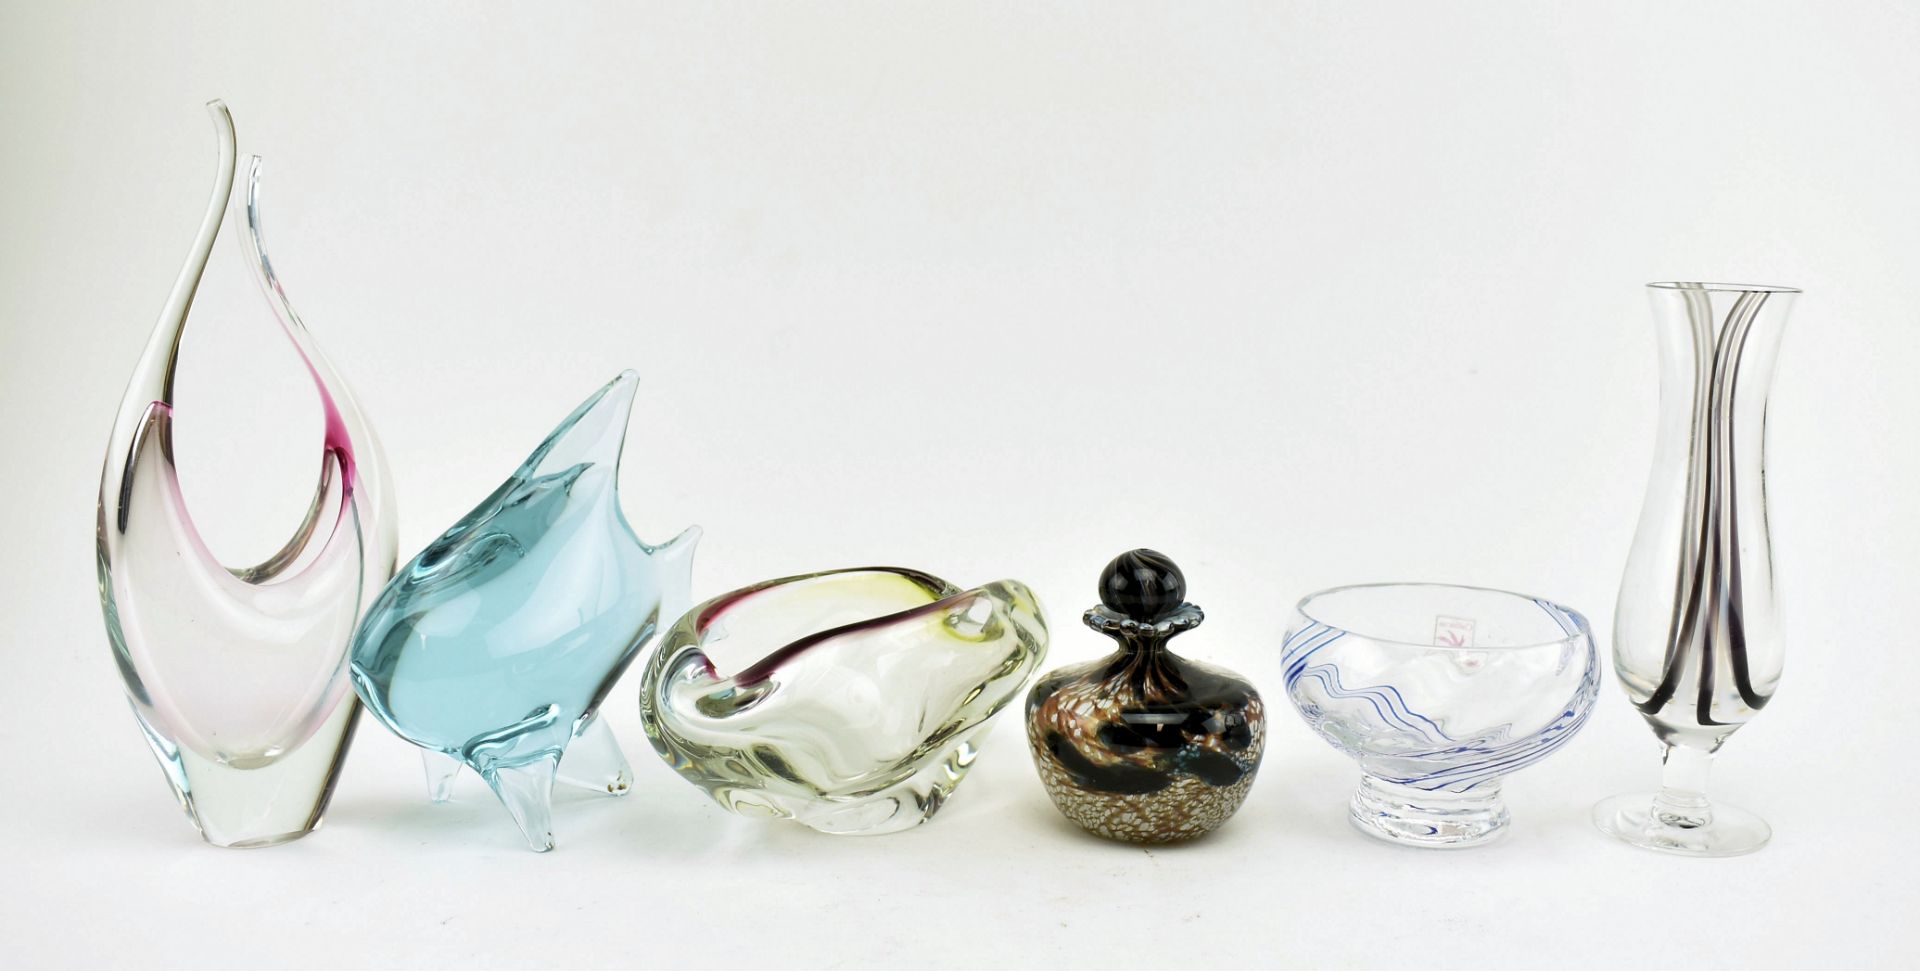 COLLECTION OF SIX 20TH CENTURY GLASS -VASES AND CENTERPIECES